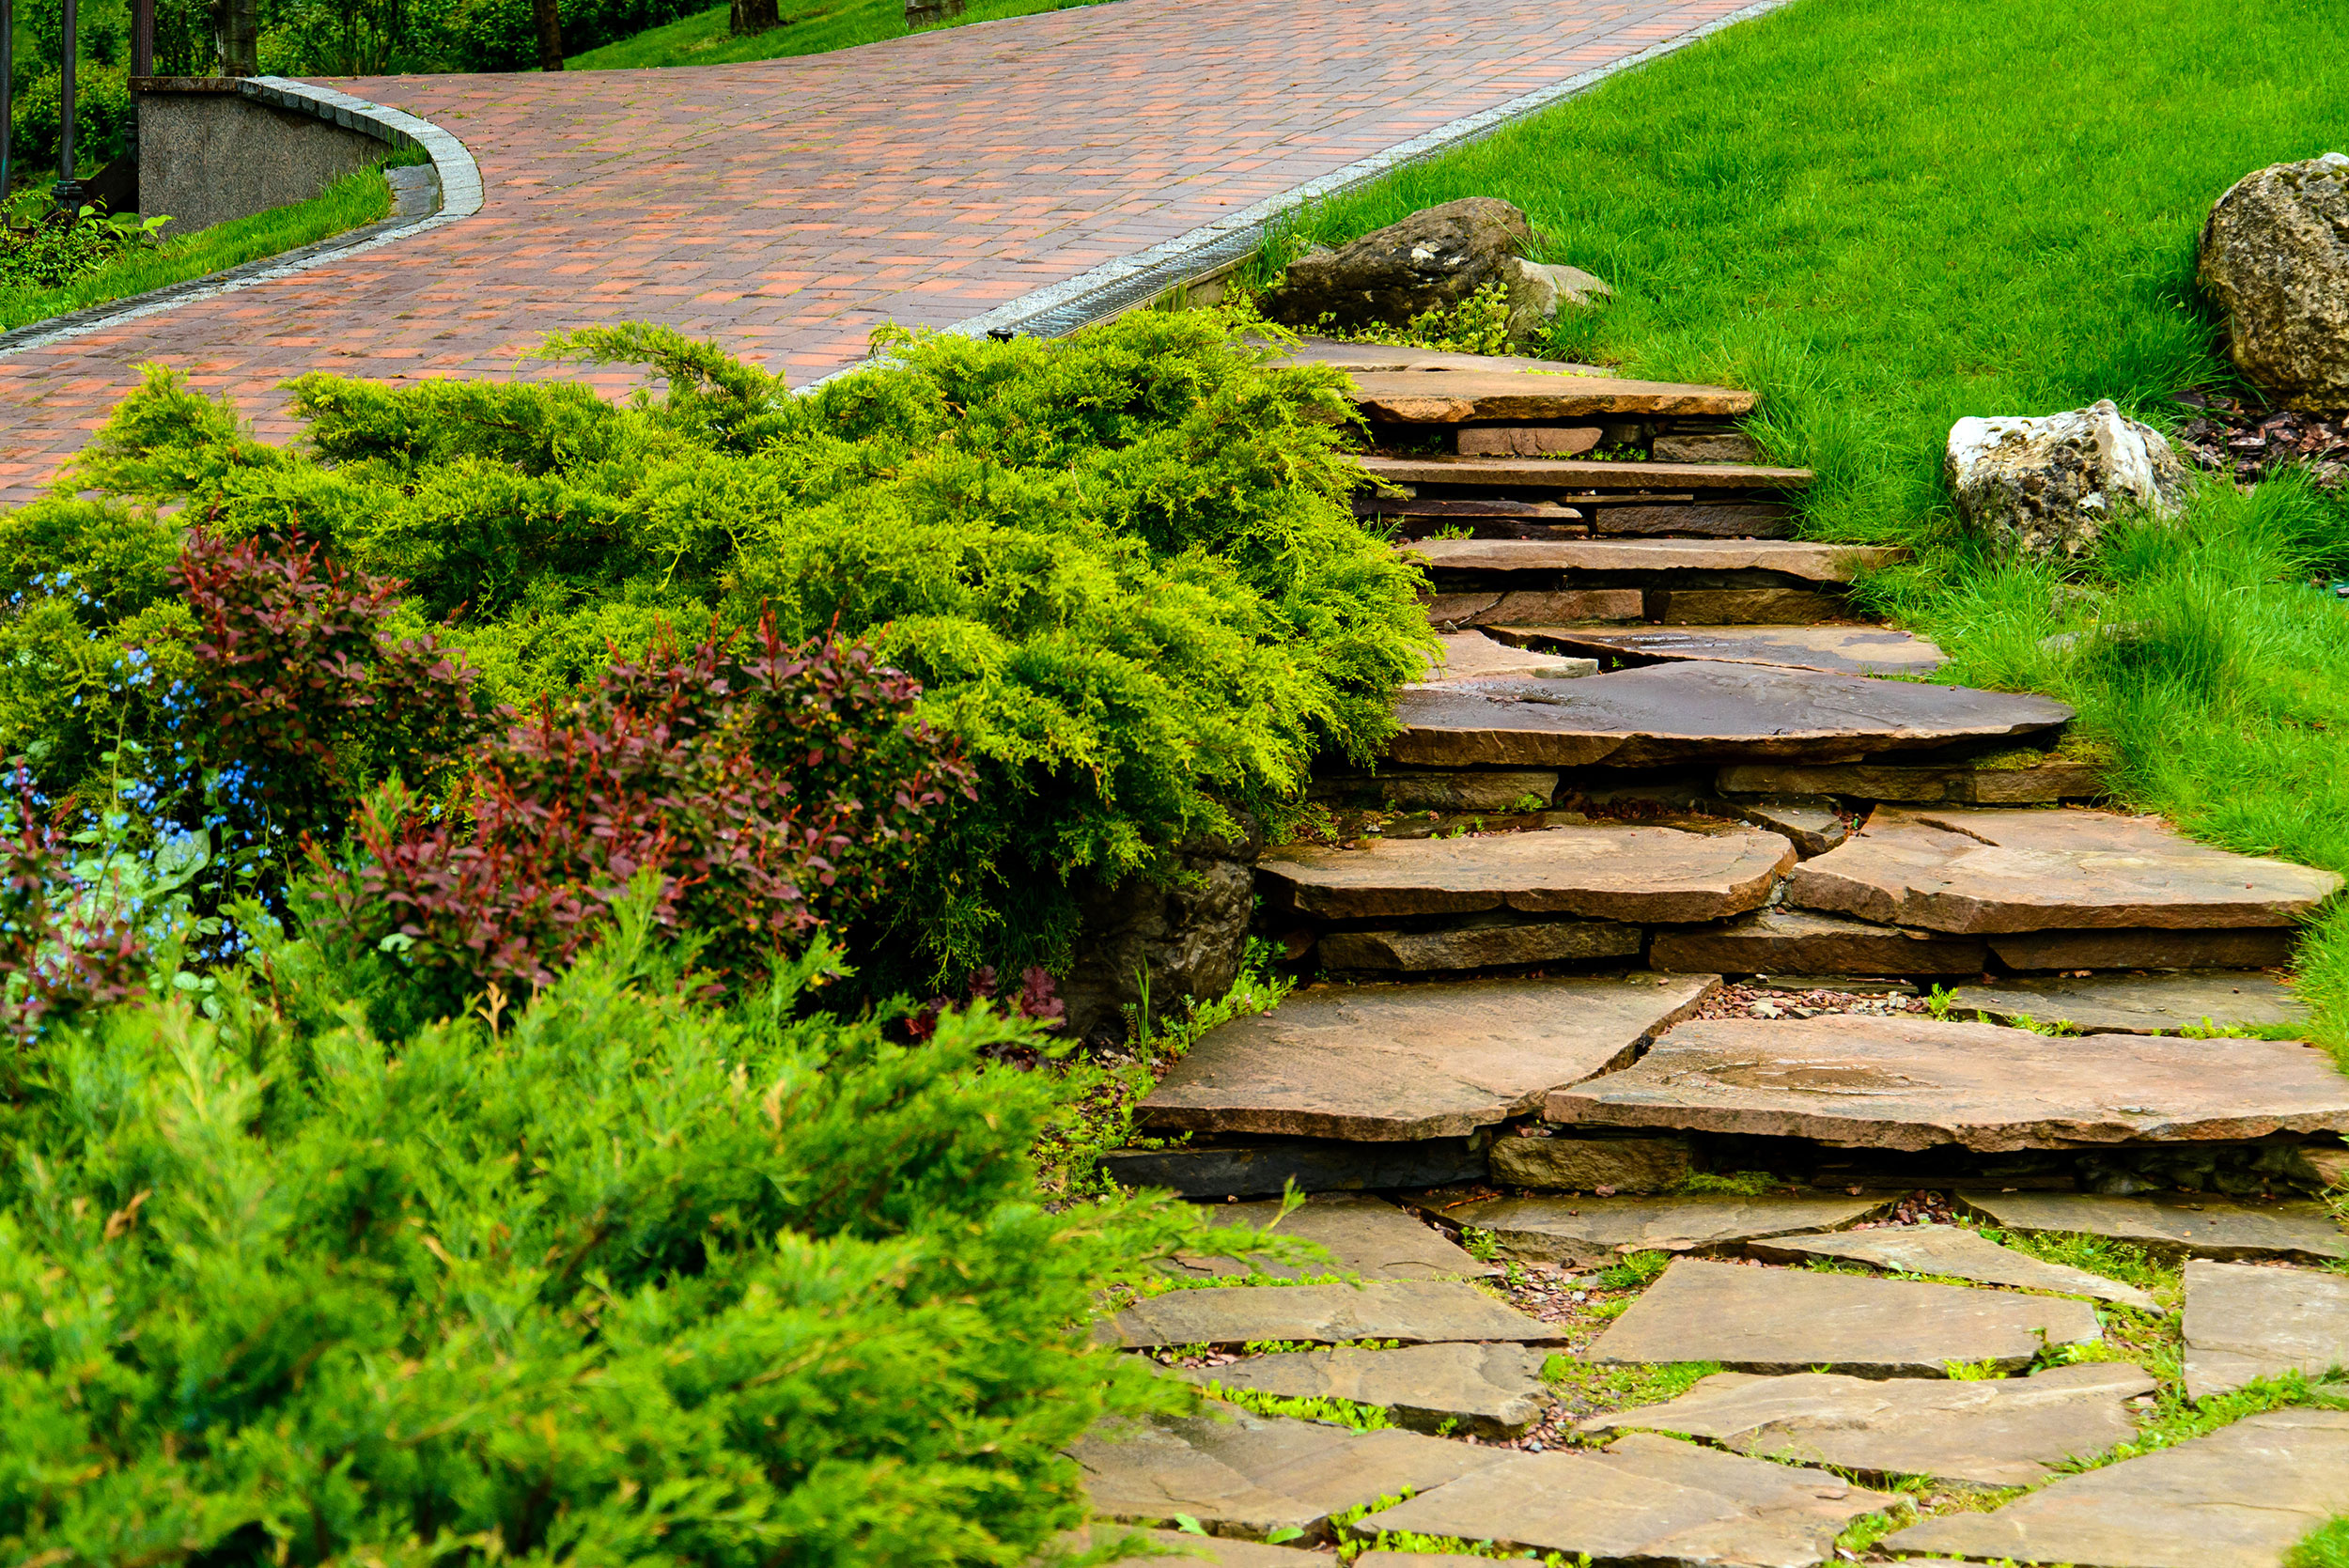 A stone path with landscaped shrubs to the left